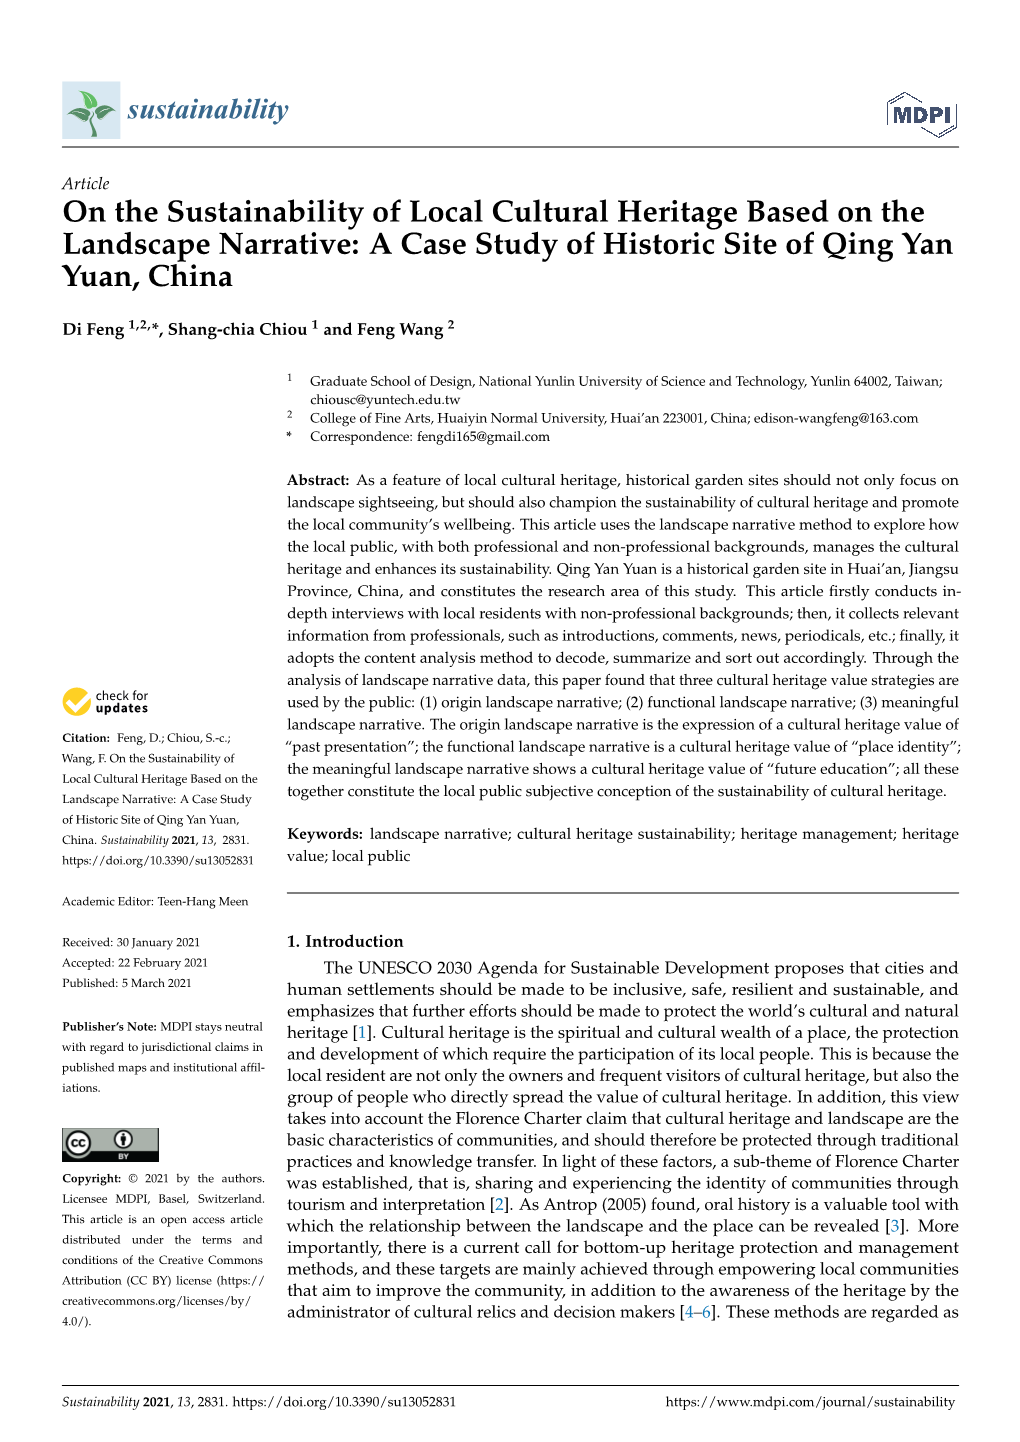 On the Sustainability of Local Cultural Heritage Based on the Landscape Narrative: a Case Study of Historic Site of Qing Yan Yuan, China